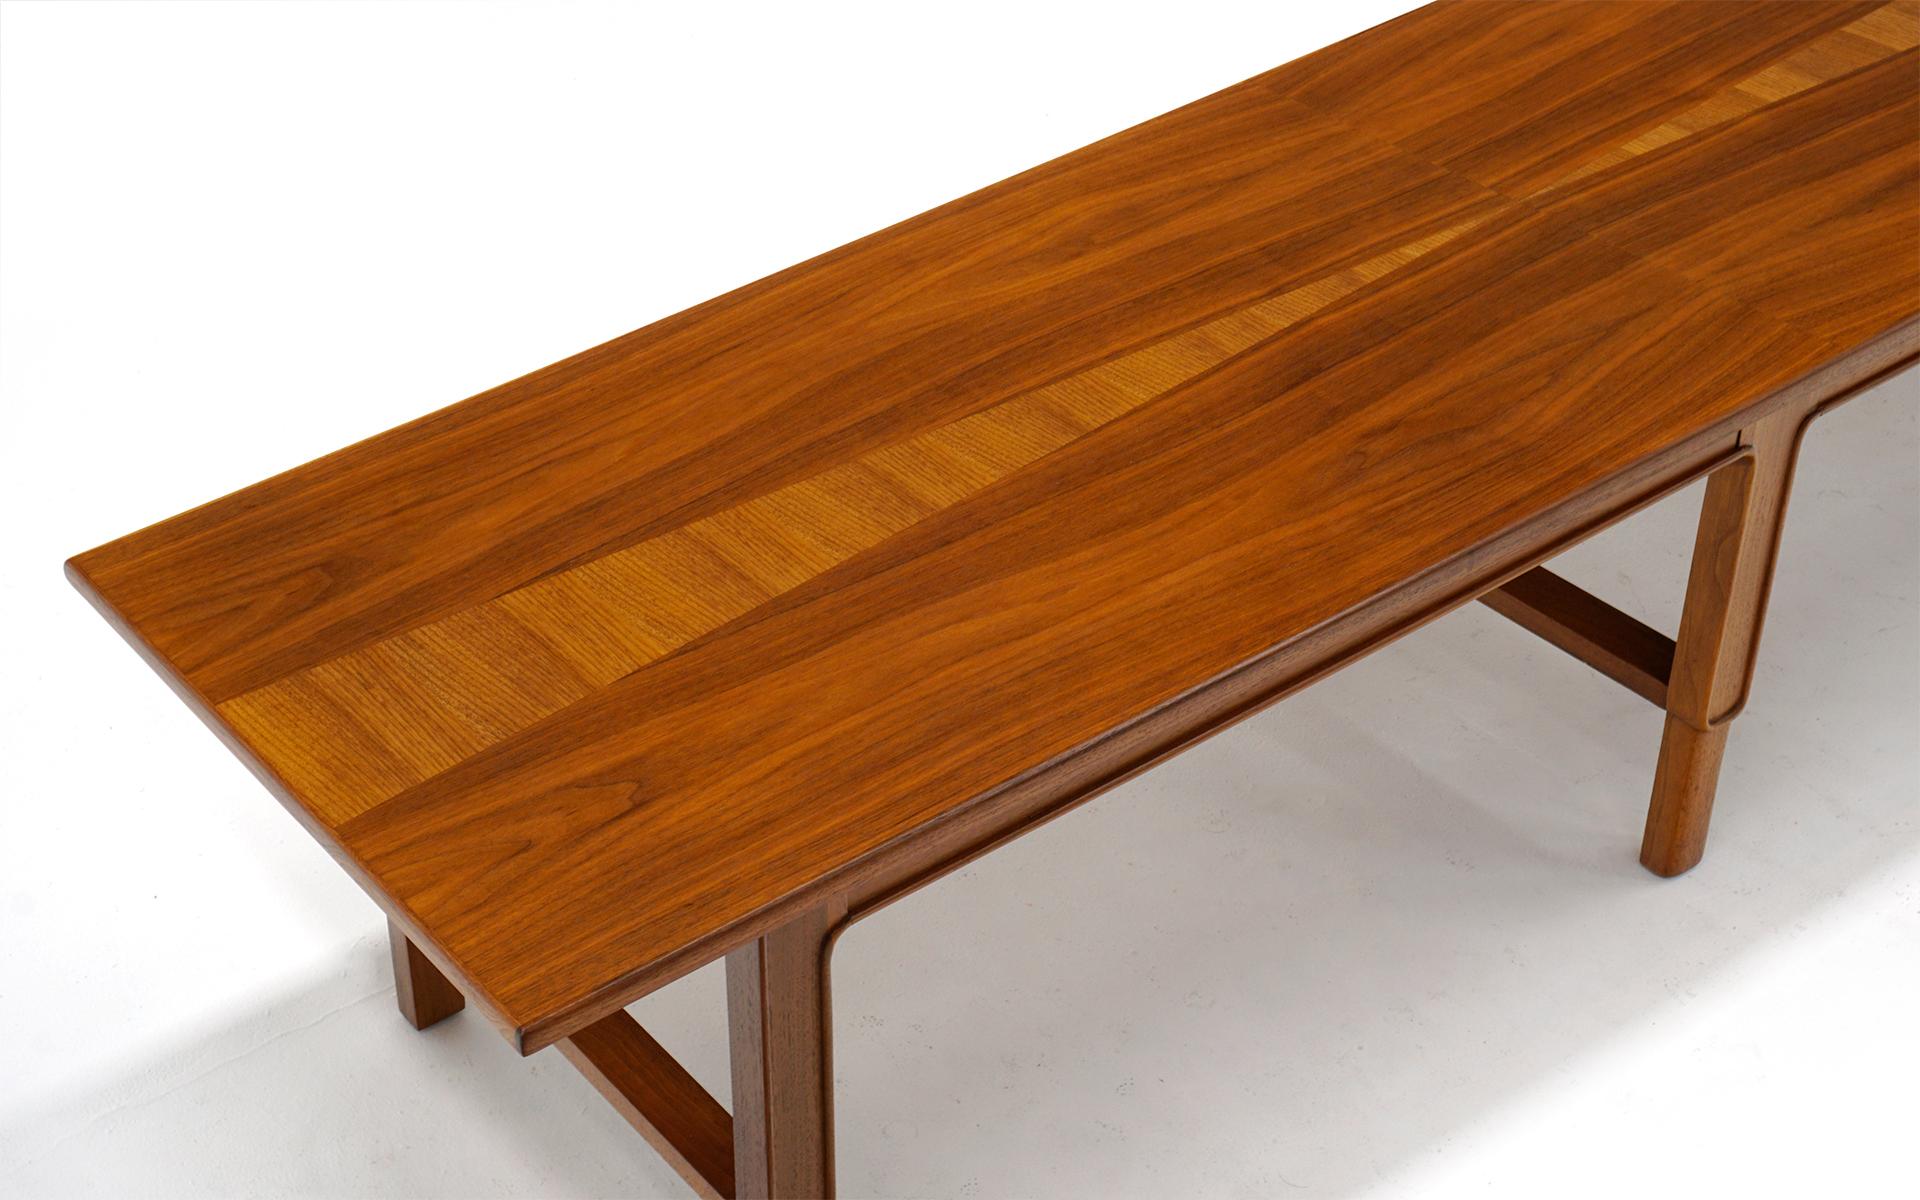 Mid-Century Modern Walnut and Teak Coffee Table or Bench by Edward Wormley for Dunbar For Sale